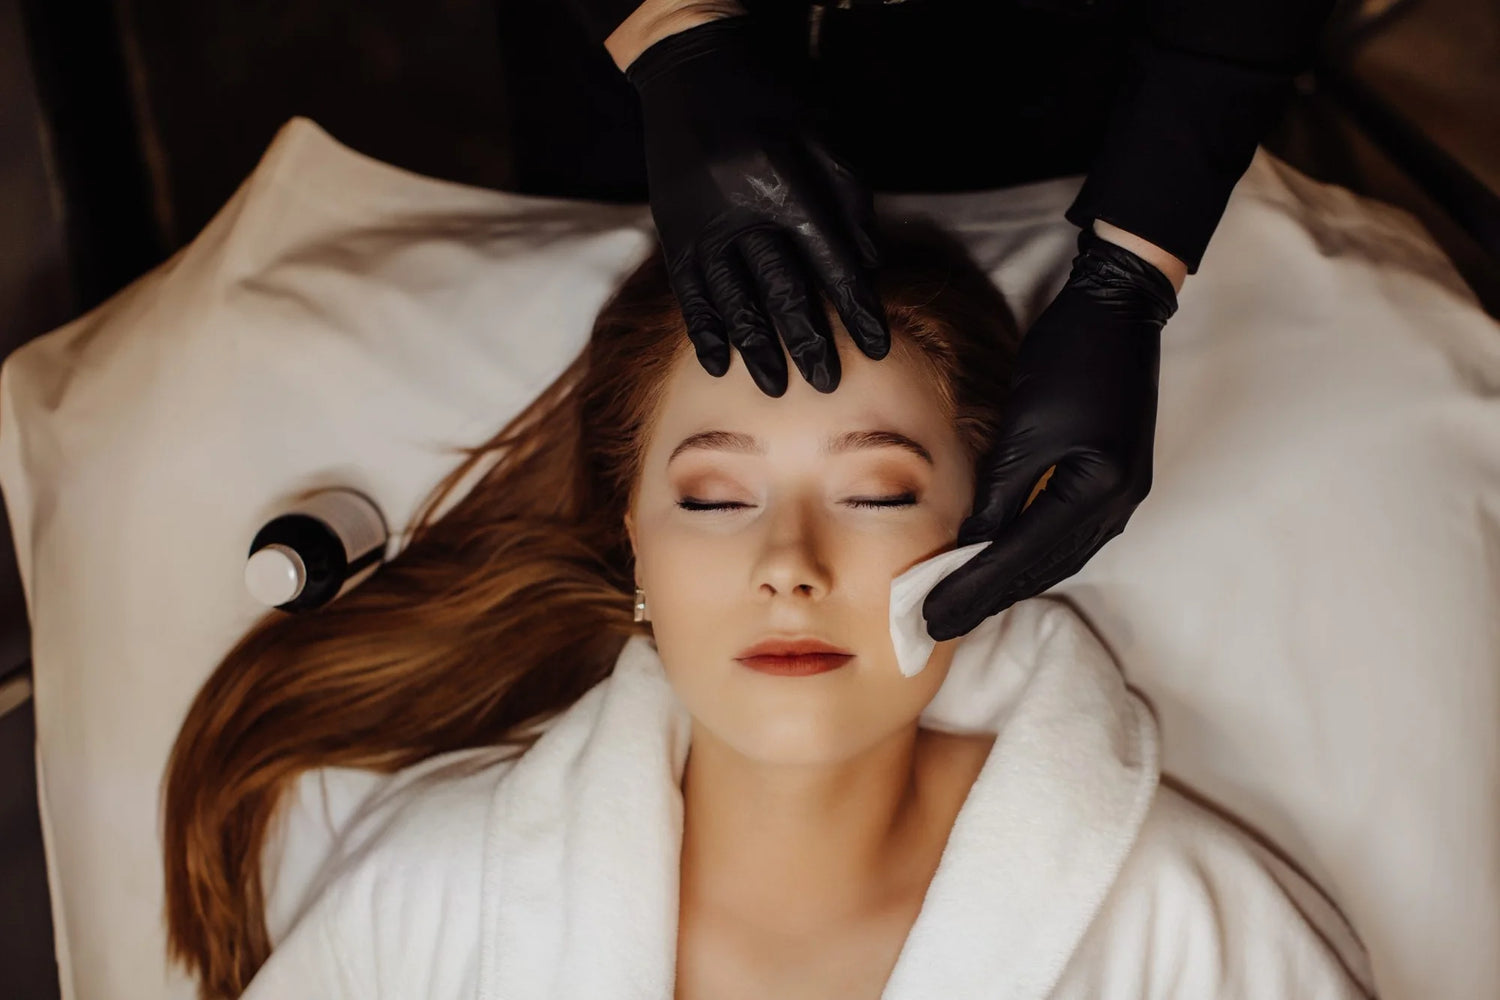 30 MINUTES TO BETTER, MORE RADIANT SKIN: THE MICRO FACIAL PEEL